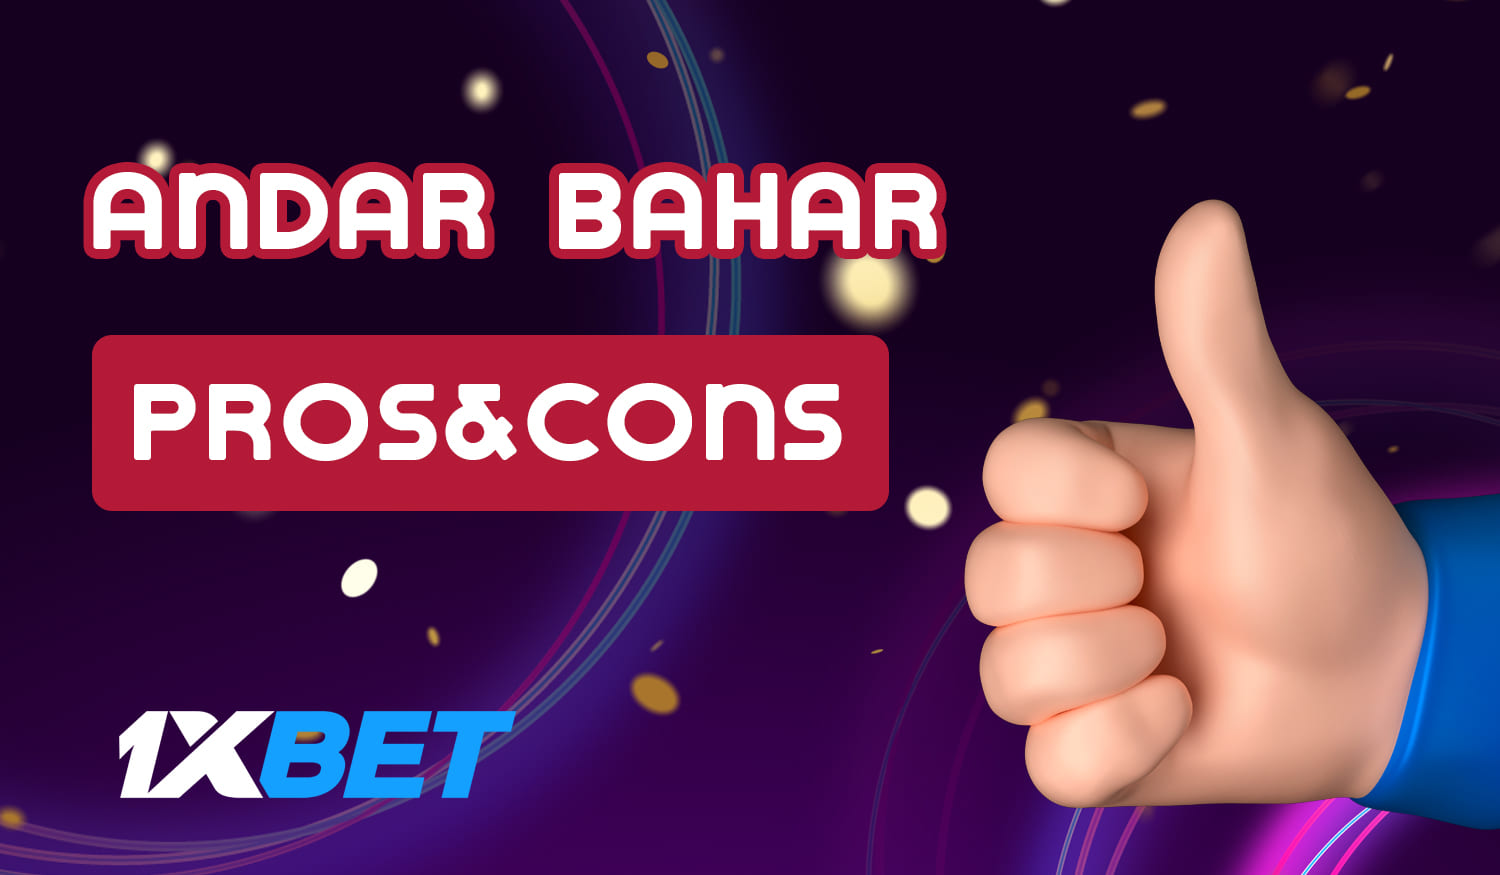 The main advantages and disadvantages of playing Andar Bahar on 1xBet